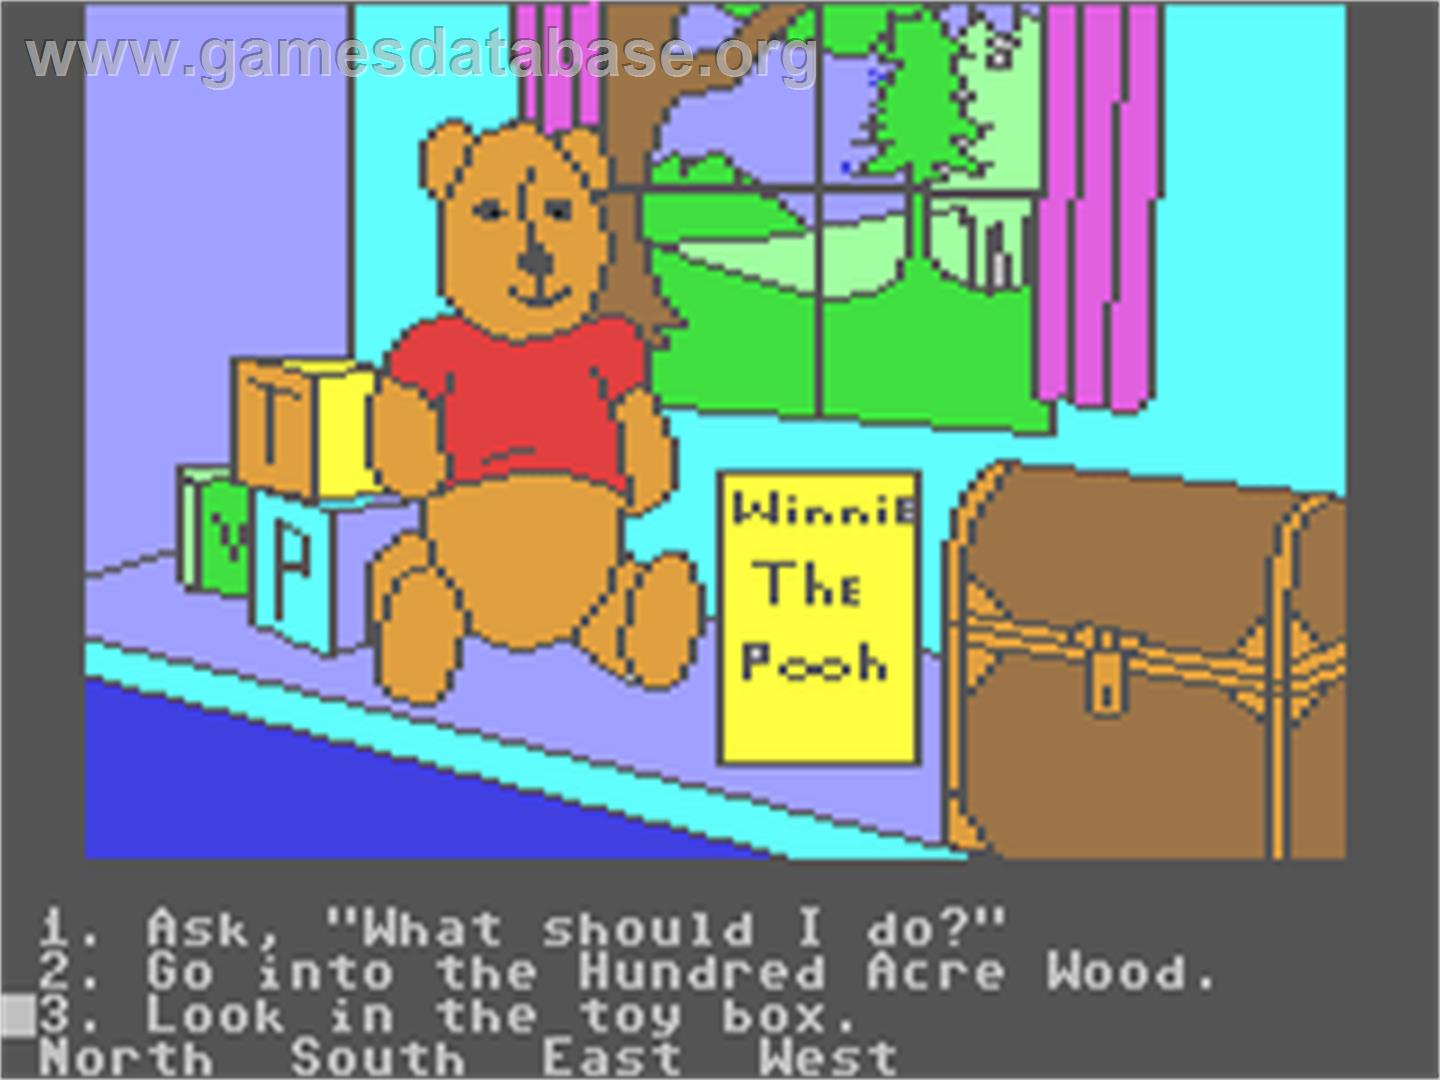 Winnie the Pooh in the Hundred Acre Wood - Commodore 64 - Artwork - In Game